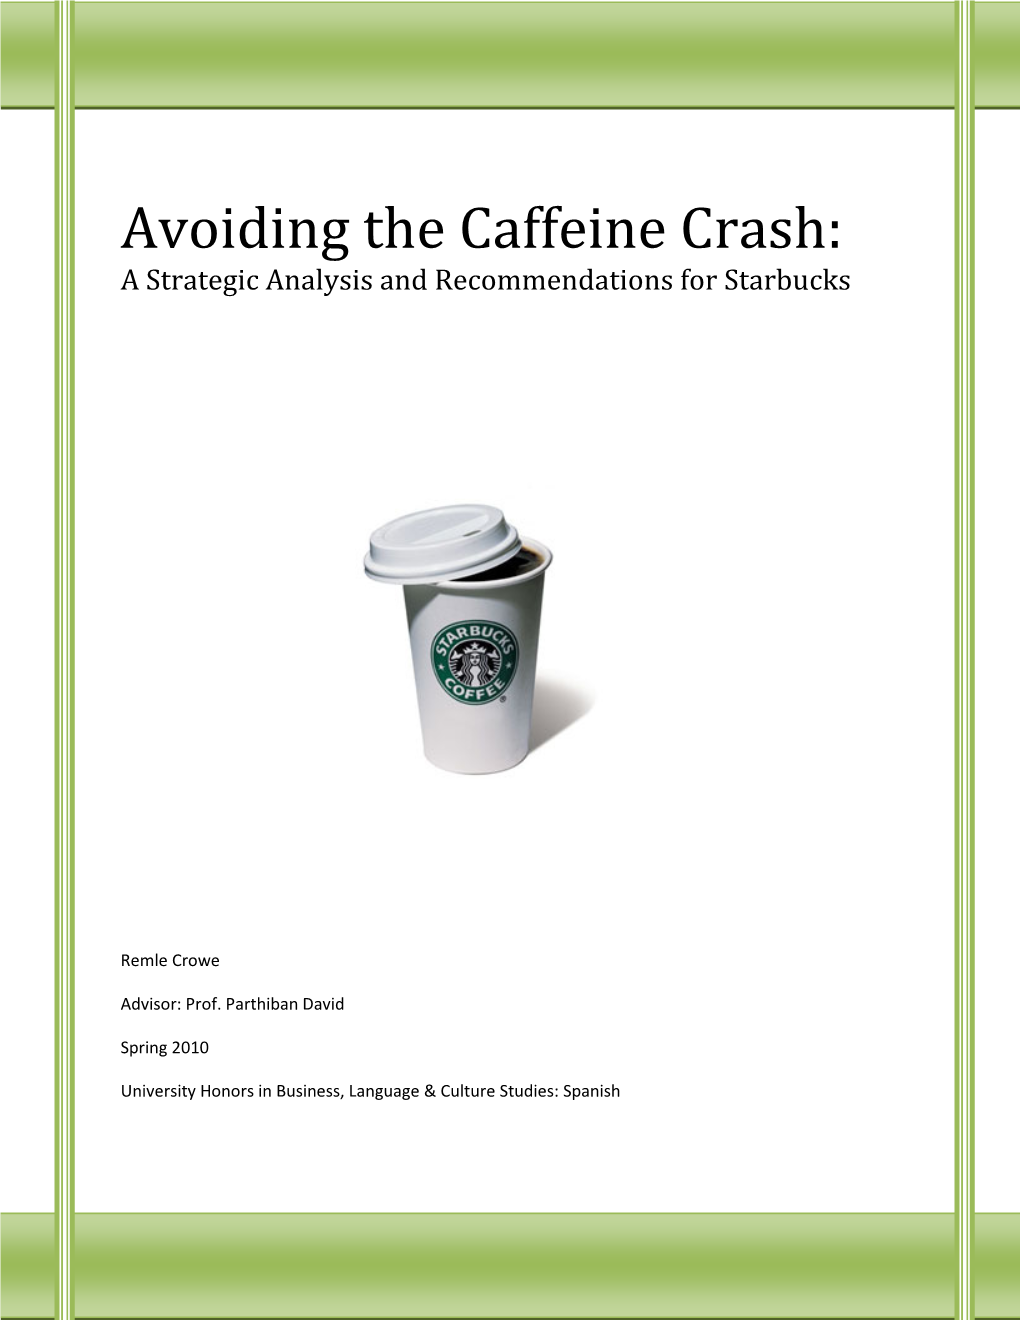 Avoiding the Caffeine Crash: a Strategic Analysis and Recommendations for Starbucks